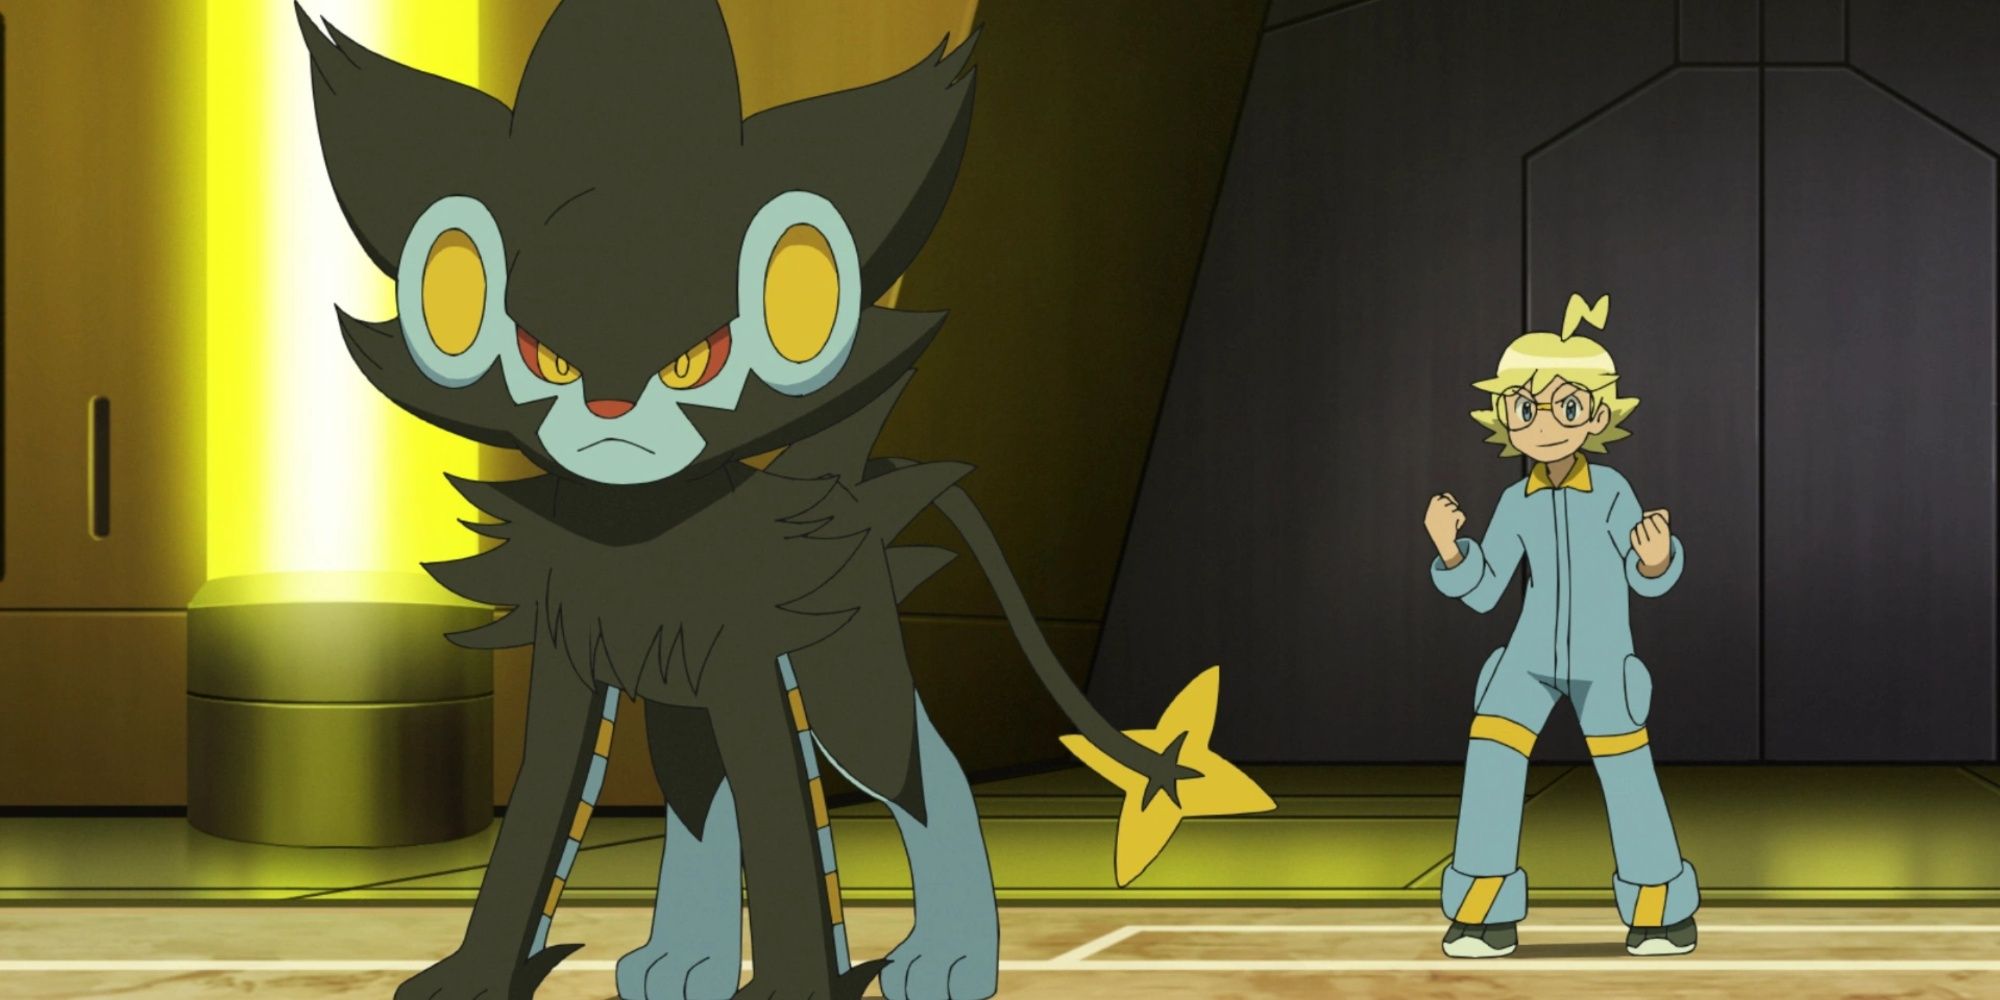 luxray with its trainer in the pokemon anime